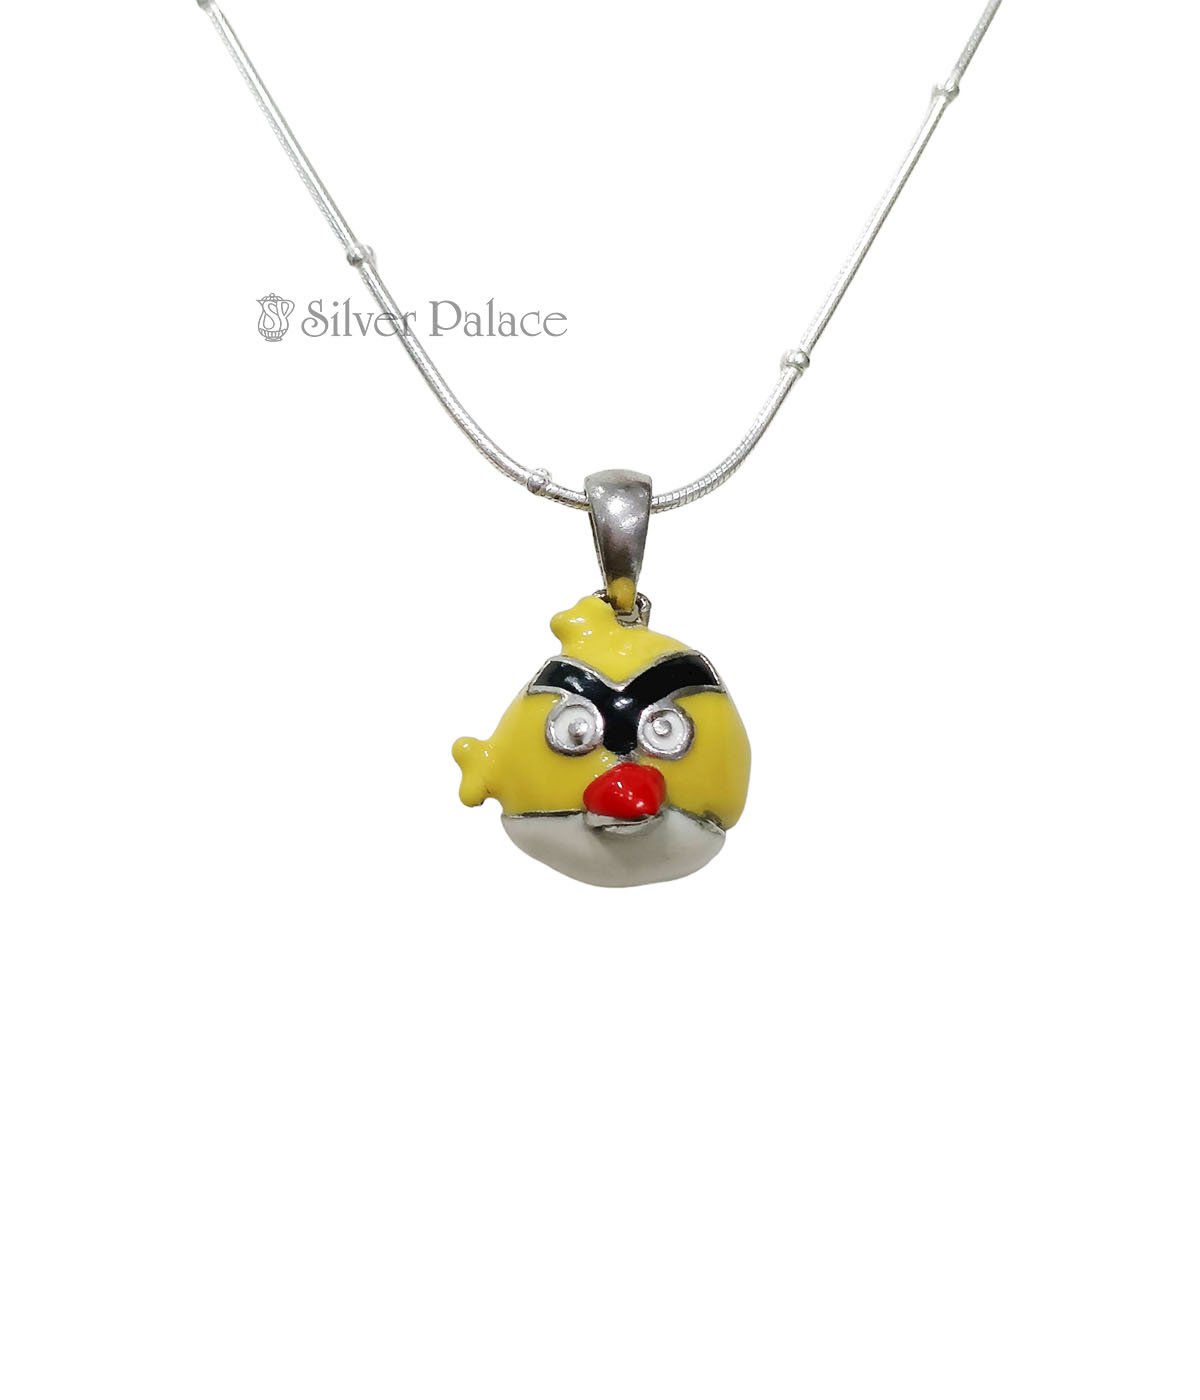 92.5 STERLING SILVER YELLOW ANGRY BIRD PENDANT 